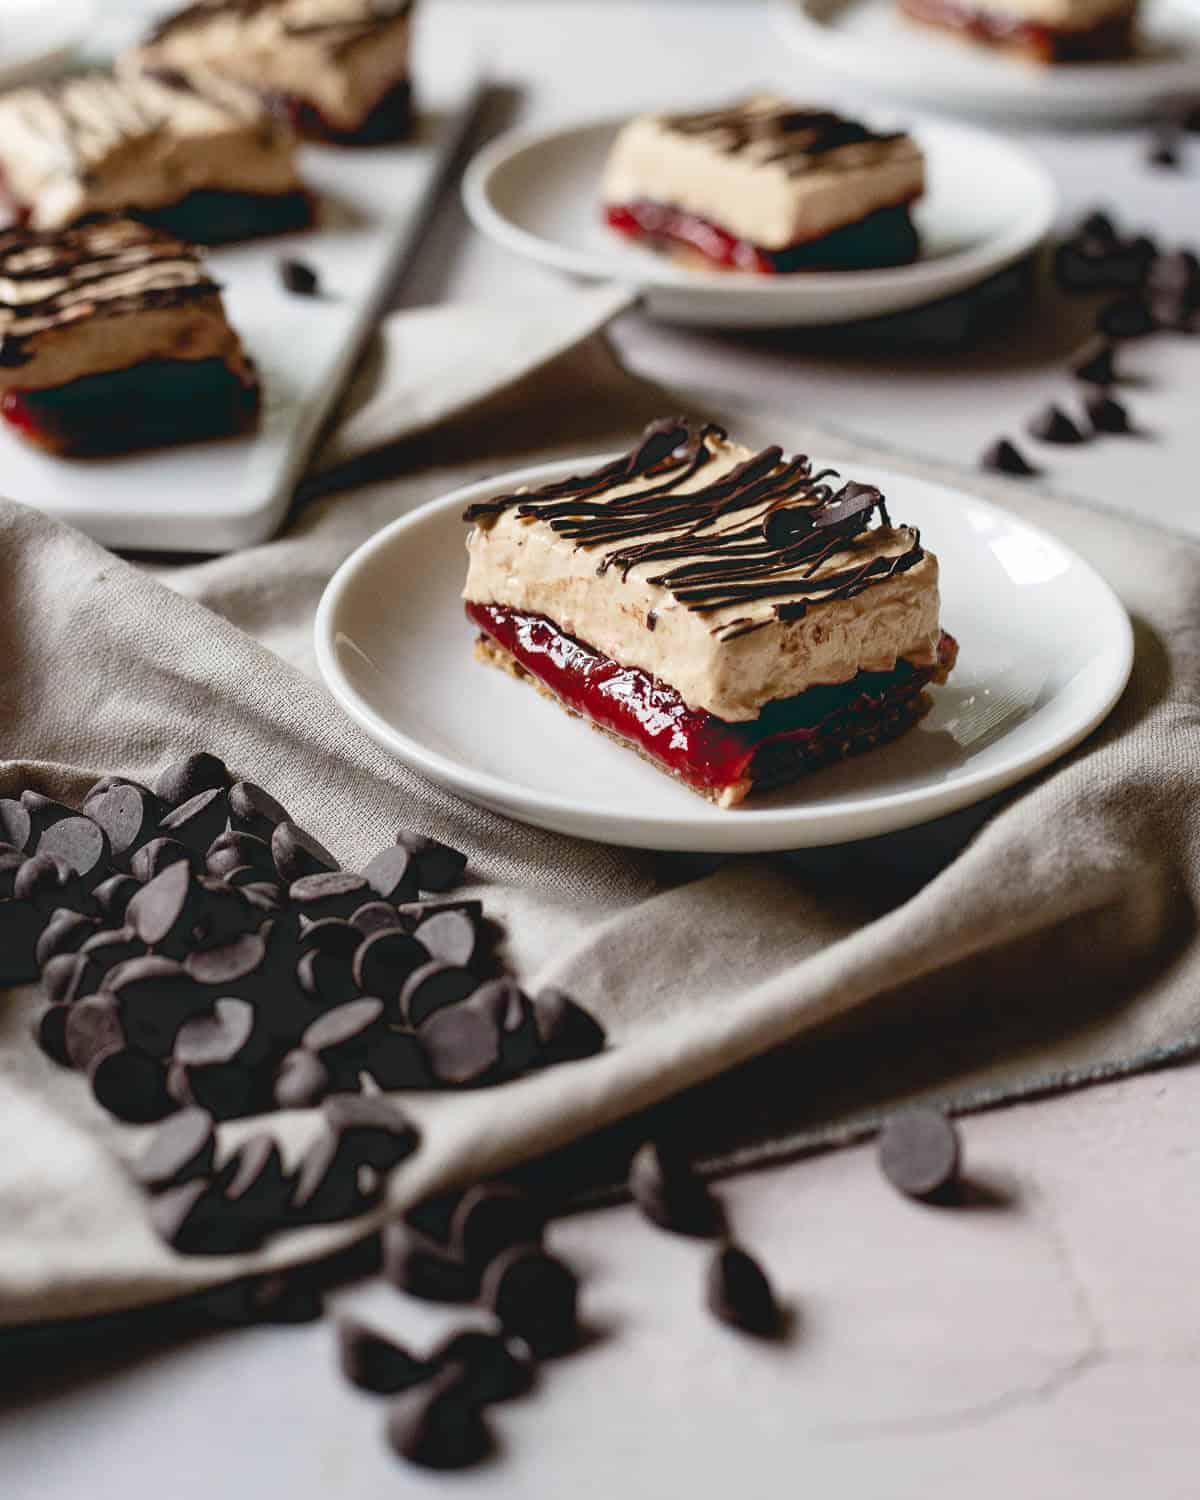 These peanut butter and jelly frozen yogurt bars have a chewy granola bar base and layers of sweet strawberry jelly, creamy peanut butter yogurt and a chocolate drizzle topping.